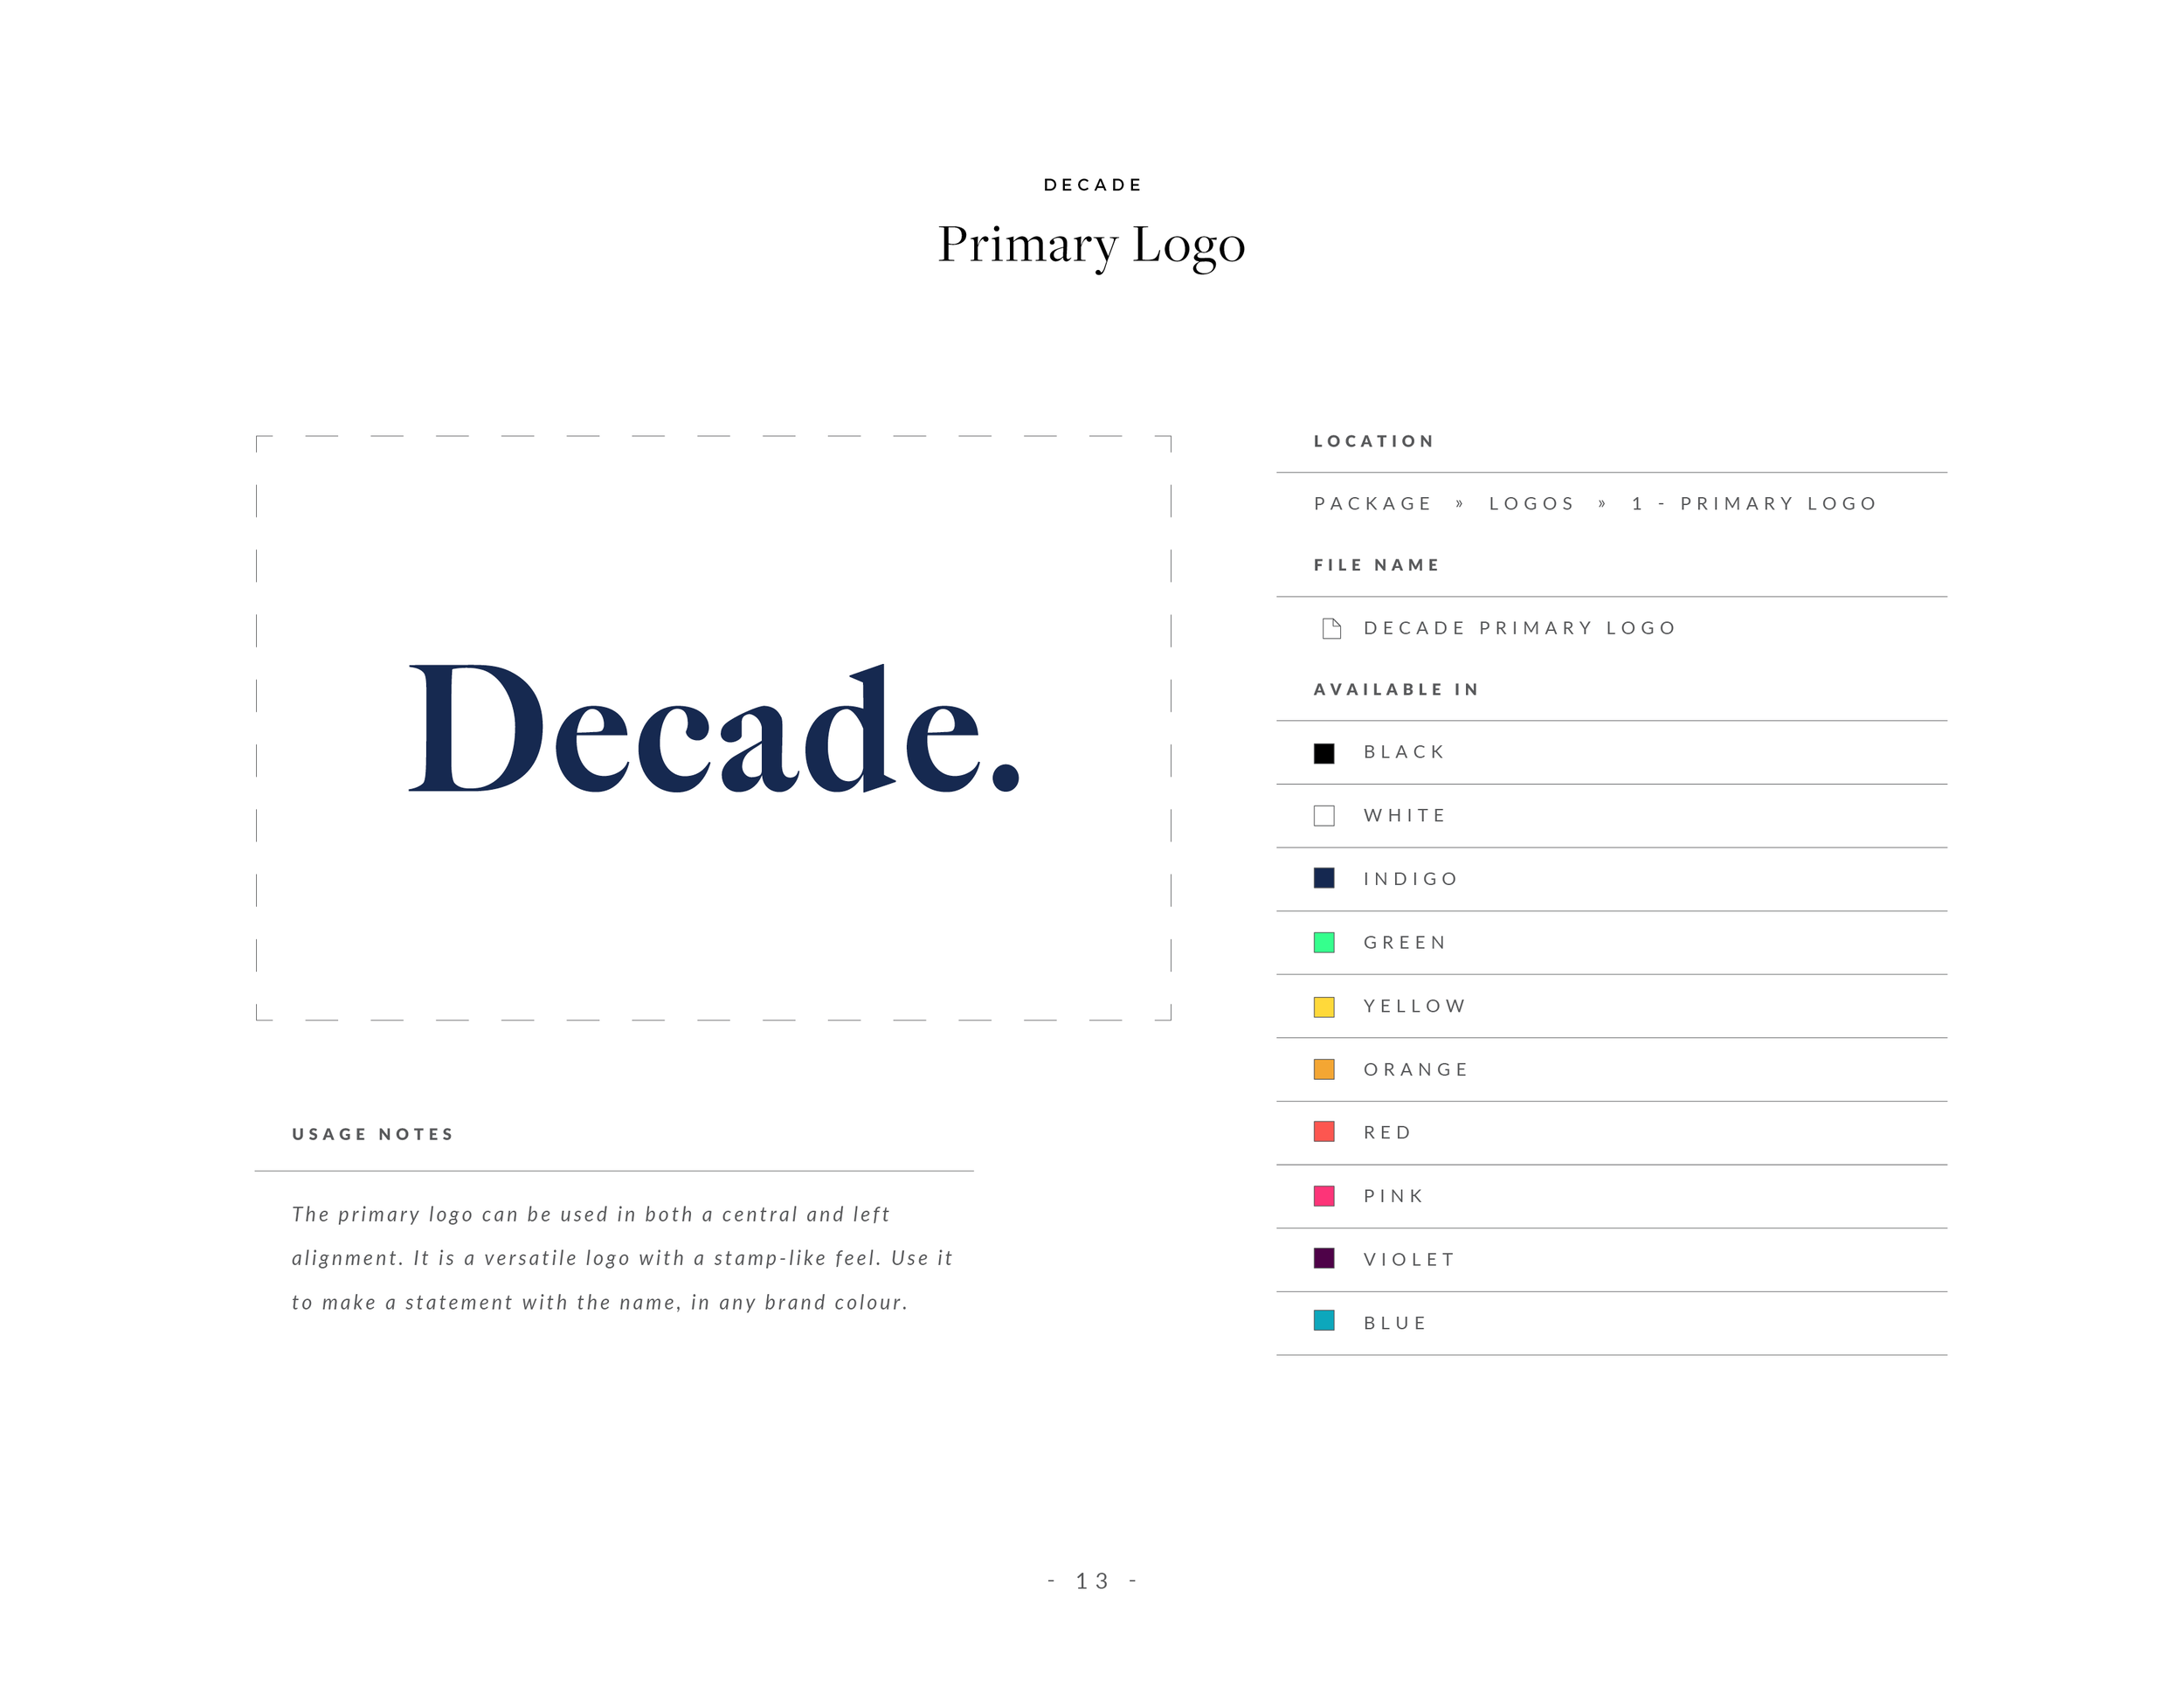 Decade Brand Guidelines13.png